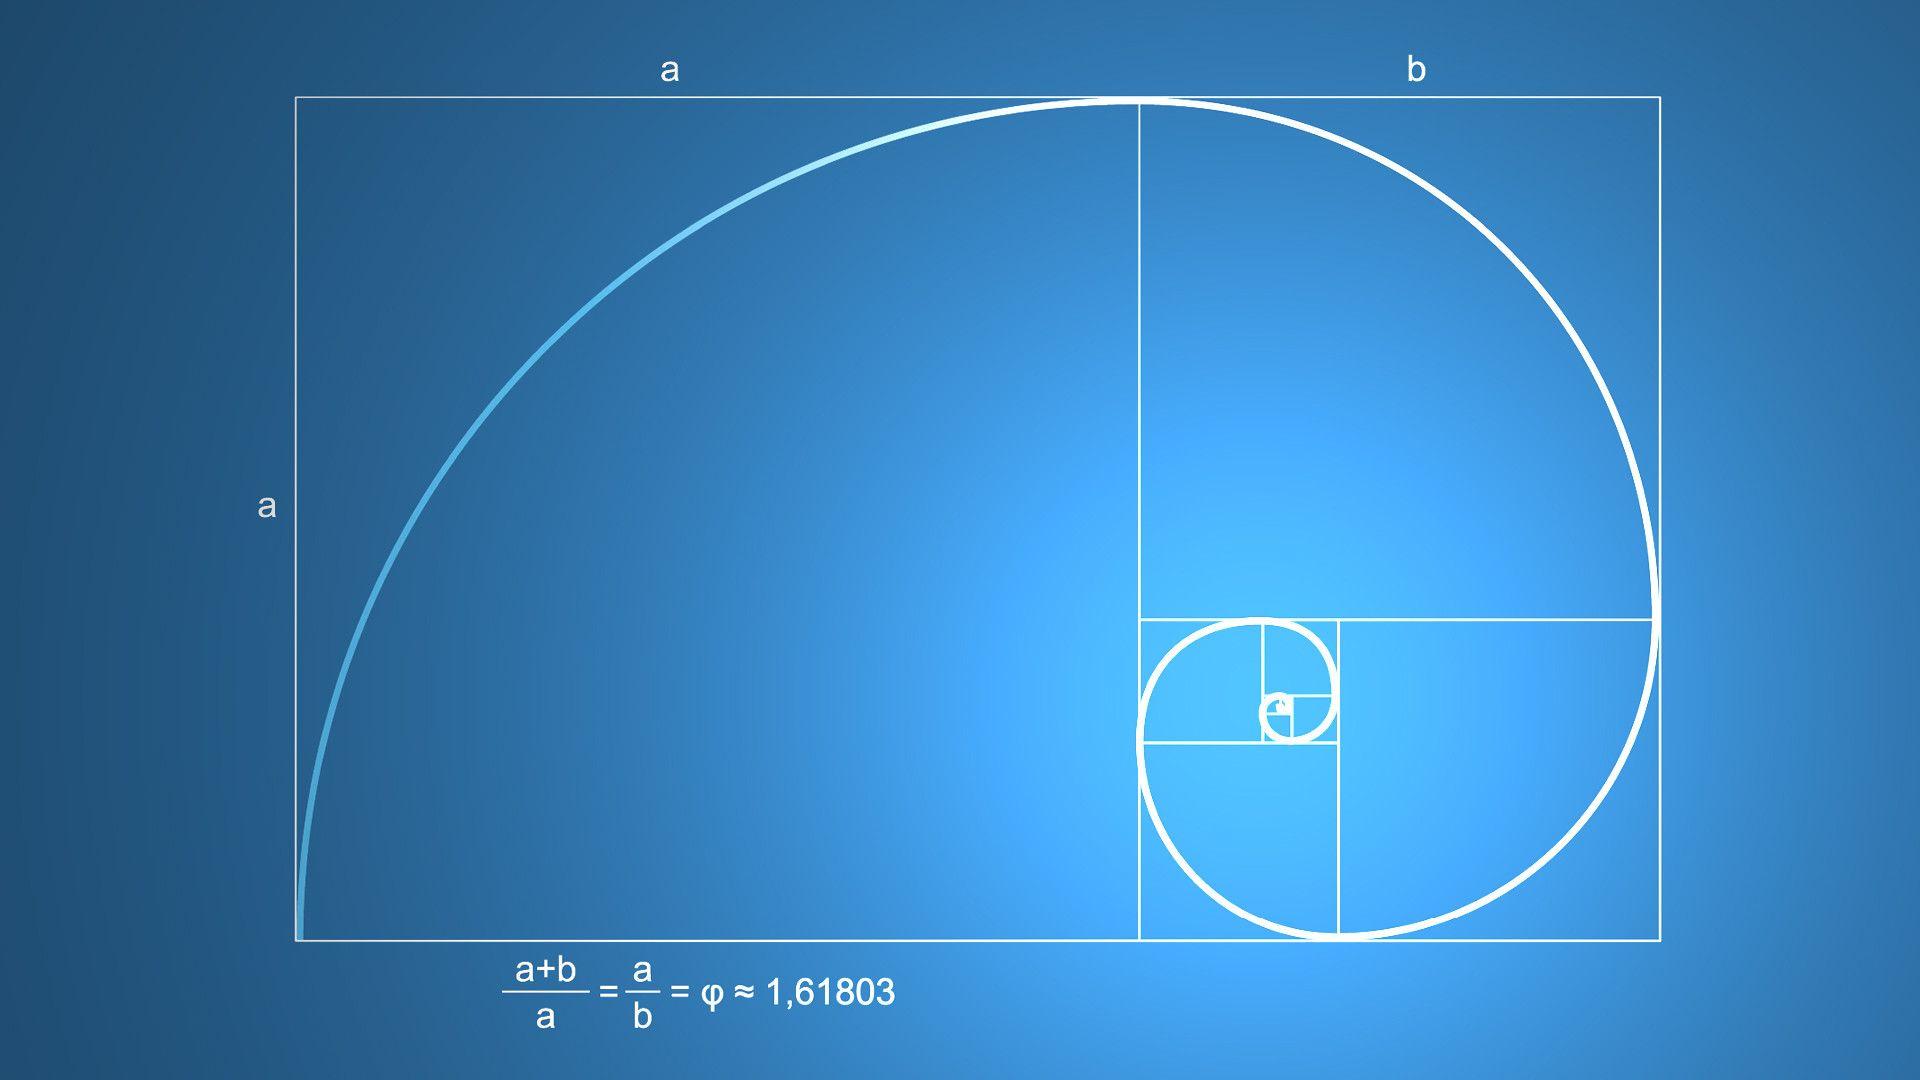 Maths Wallpaper Related to Trigonometry